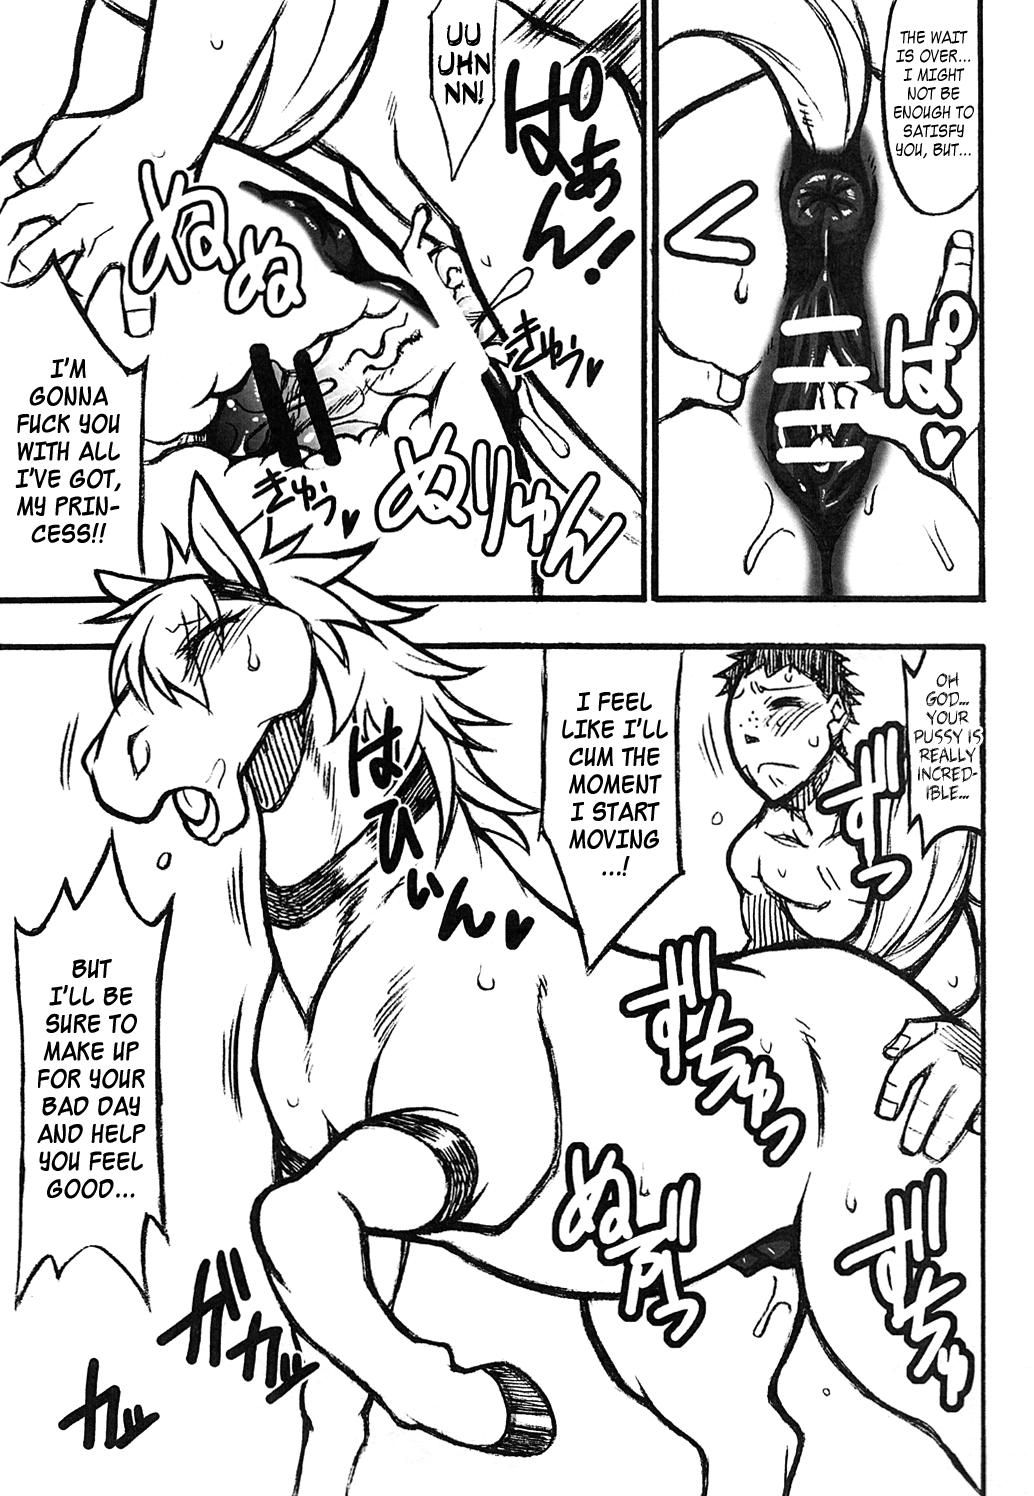 Hot Whores Mare Holic Kemolover EX Ch.1-3 Atm - Page 9